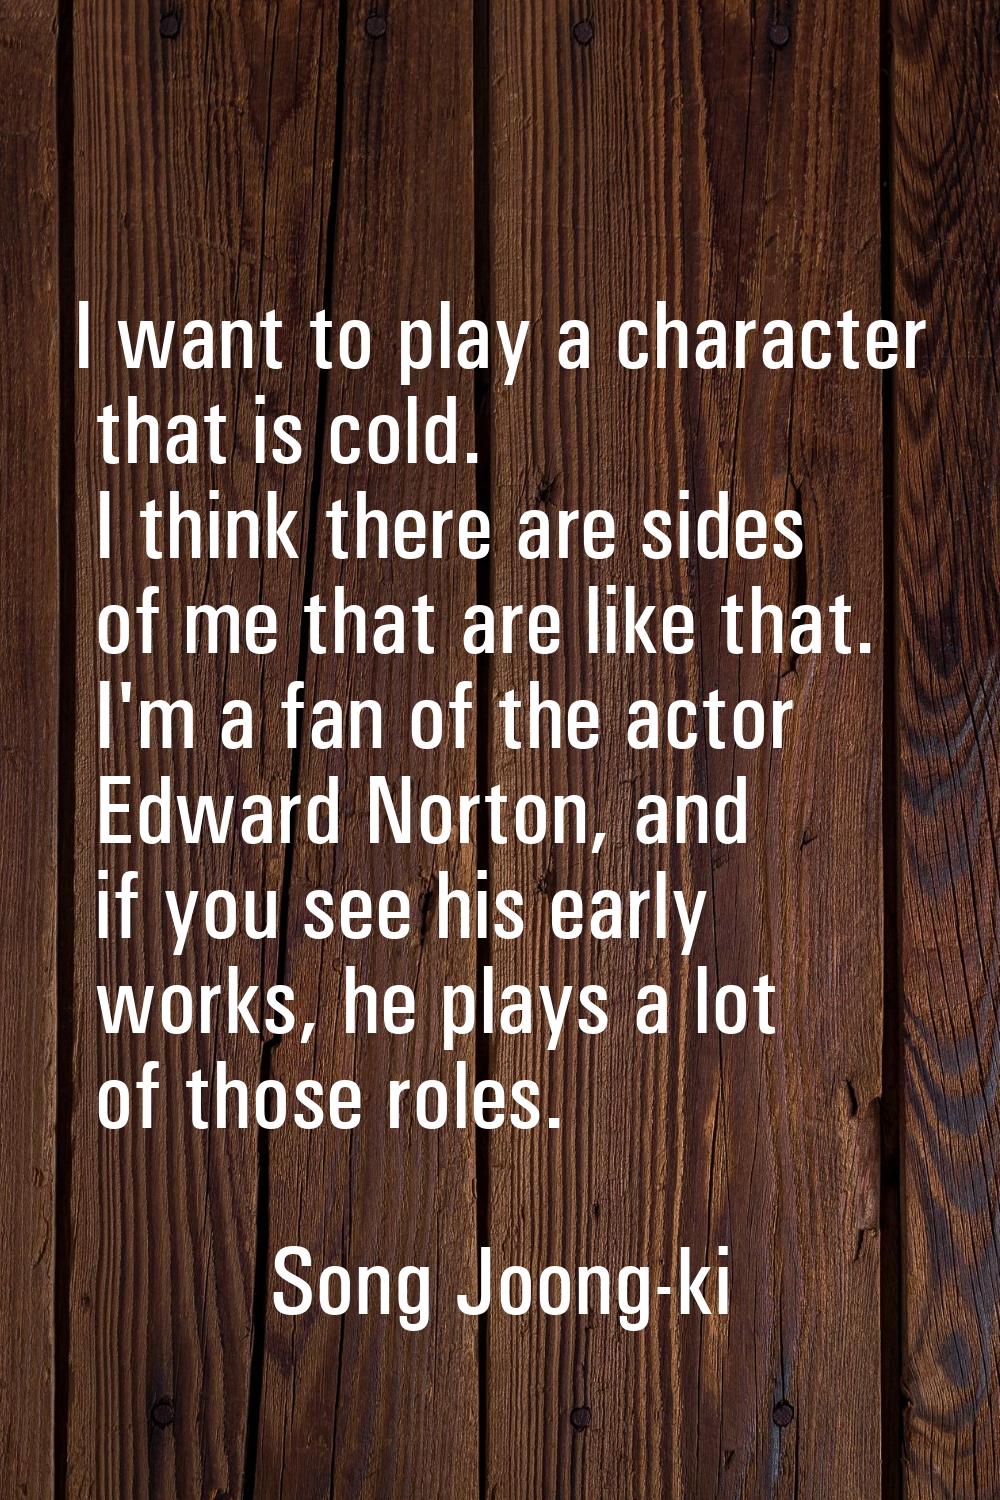 I want to play a character that is cold. I think there are sides of me that are like that. I'm a fa